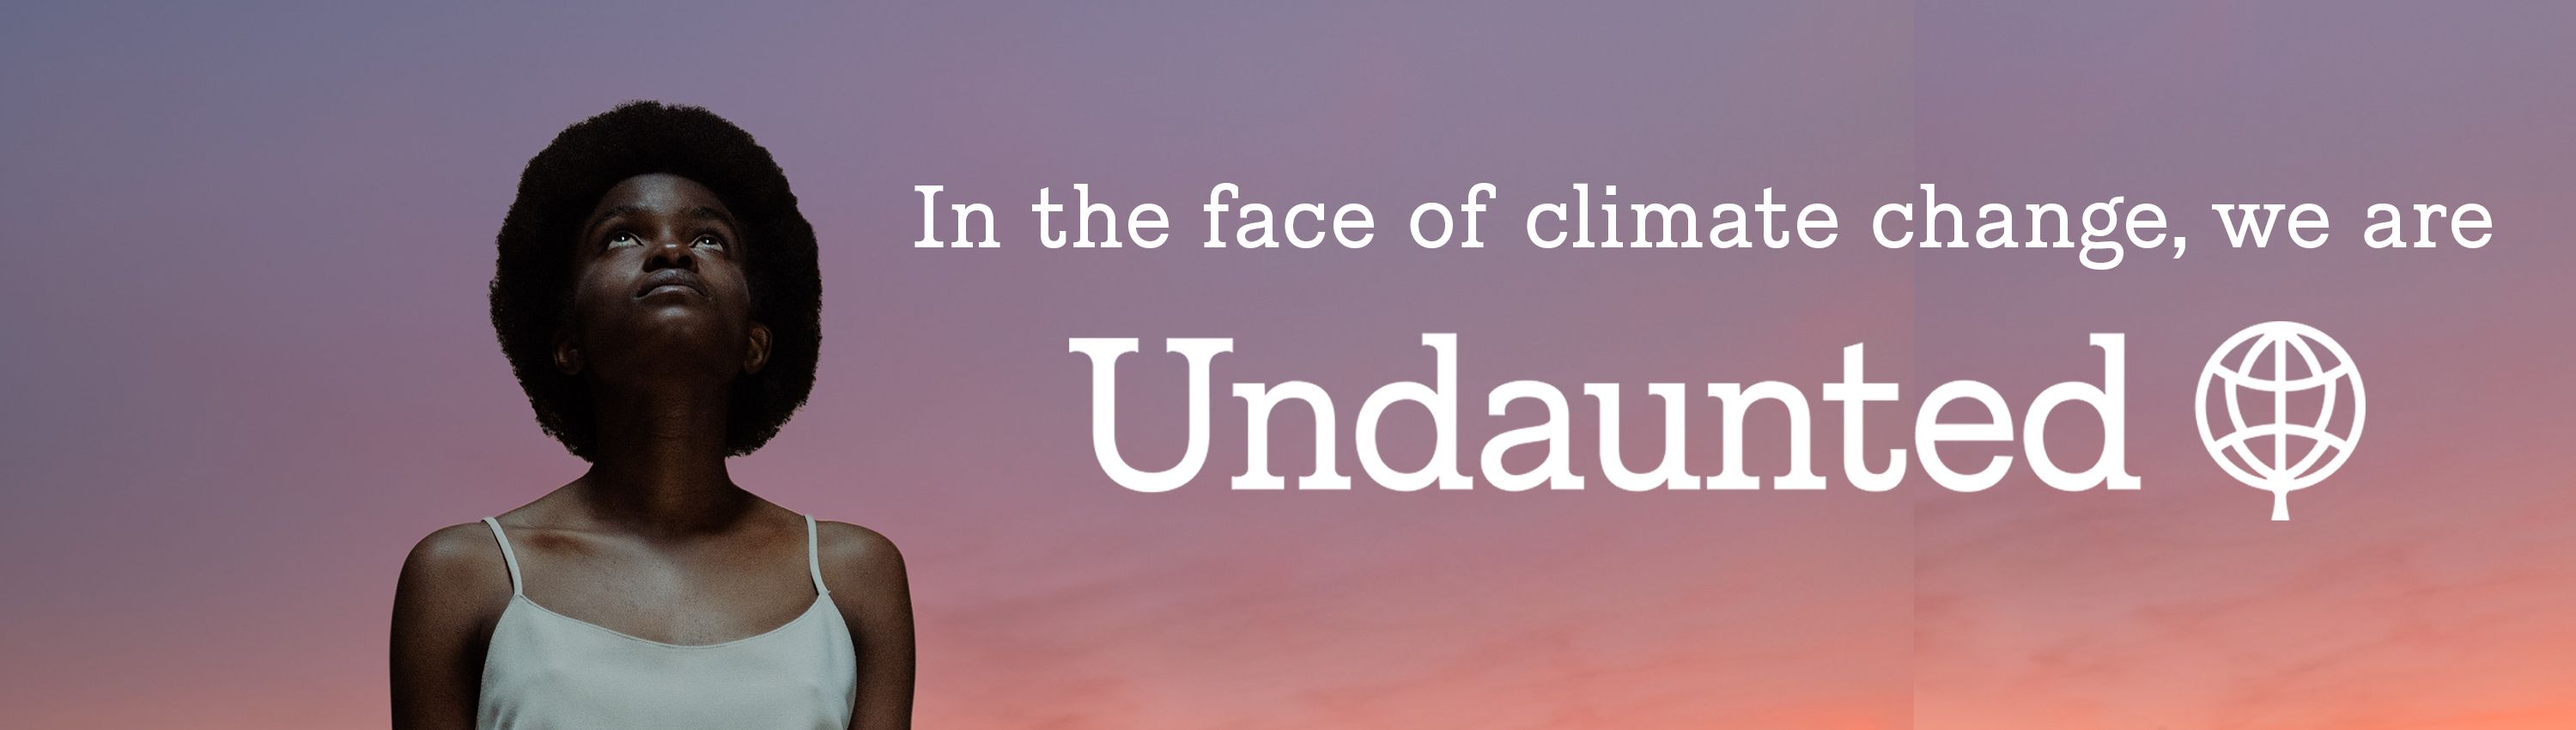 A woman looks up toward a purple sky with the text: In the face of climate change, we are Undaunted